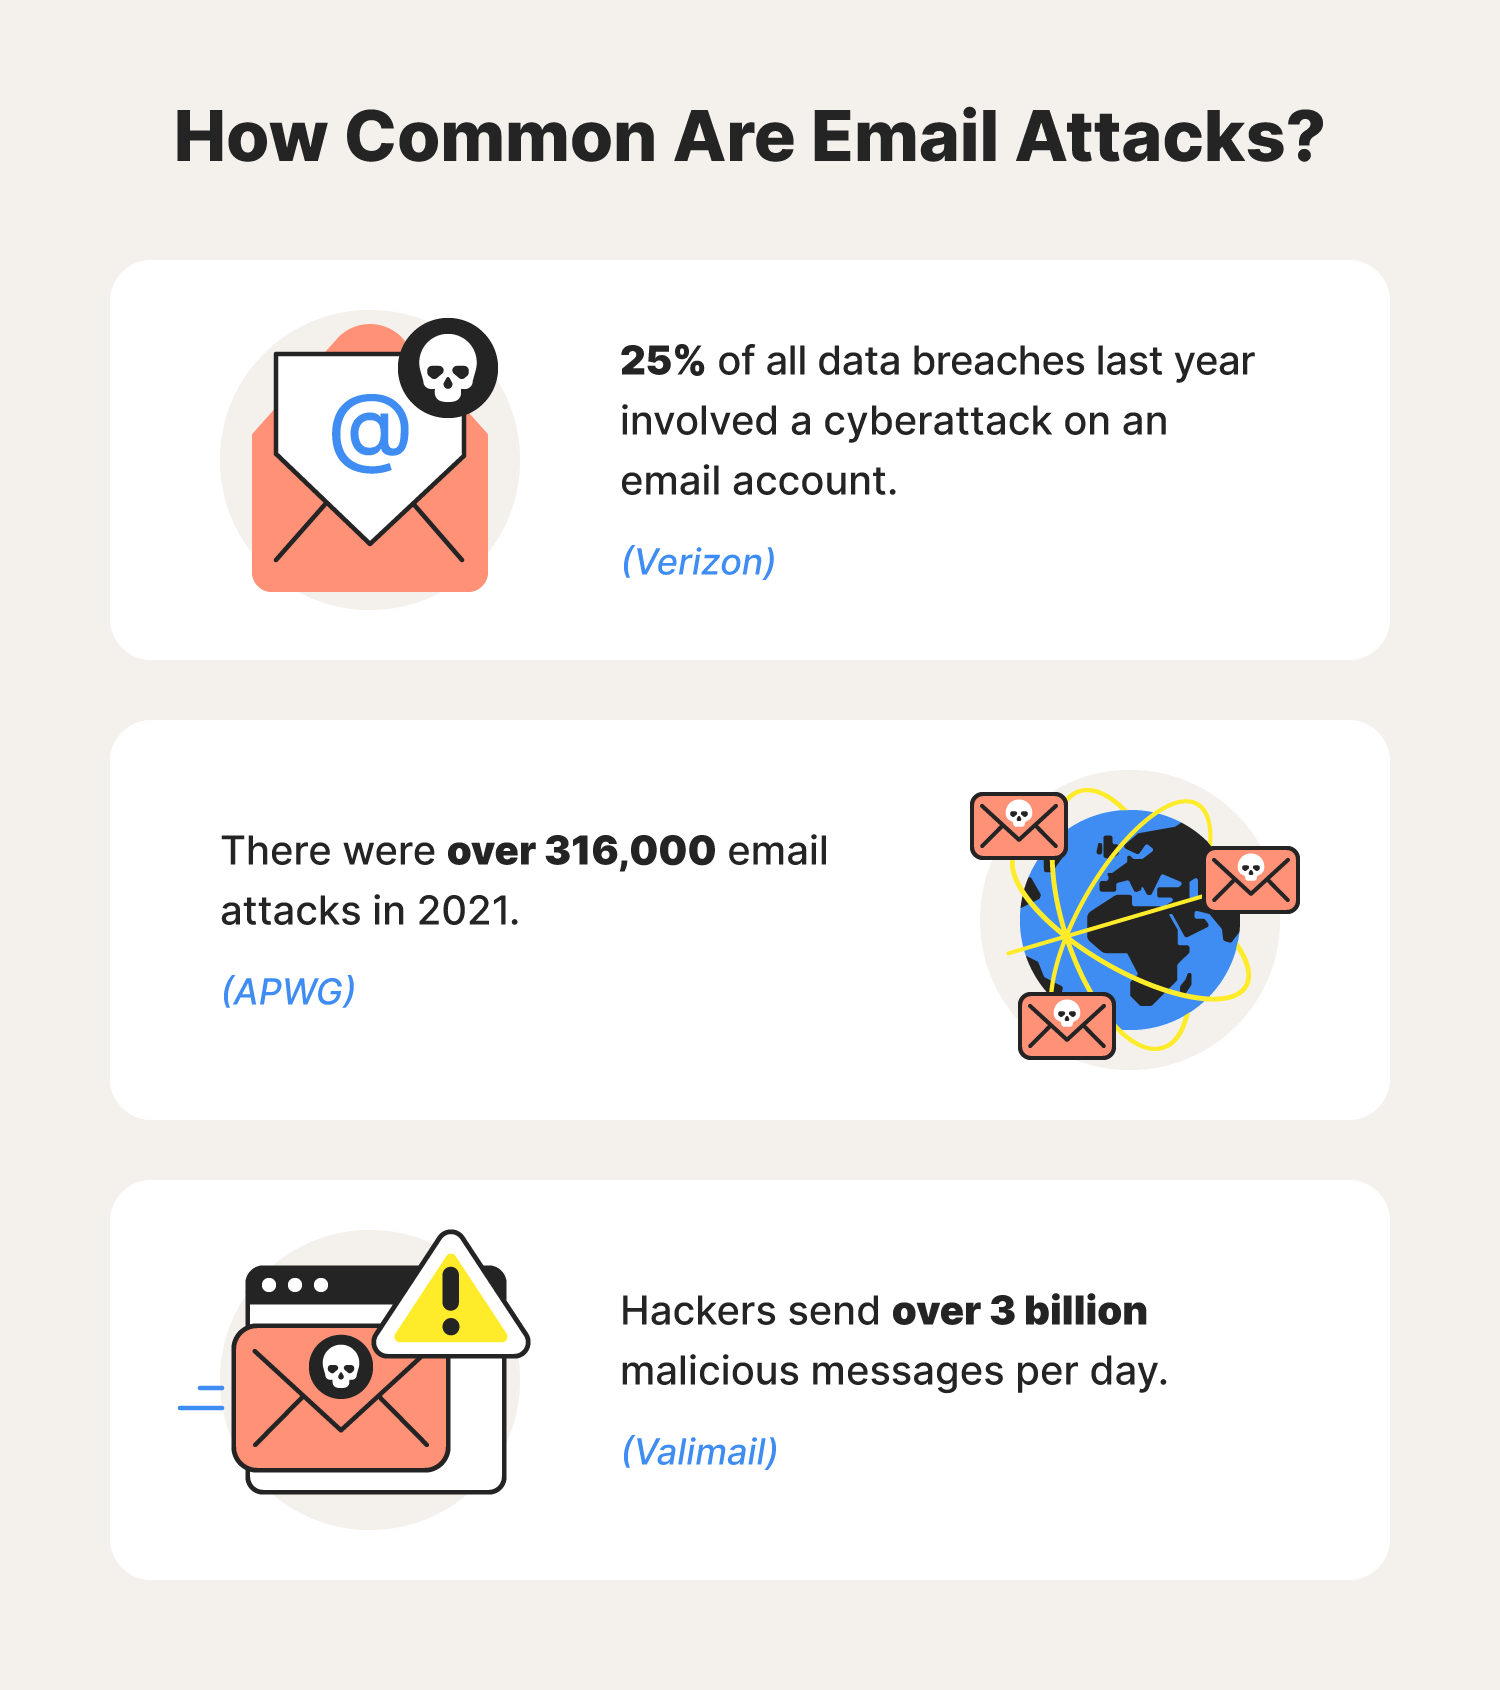 Three statistics underscore just how common email attacks really are and why online users should improve their email security. 